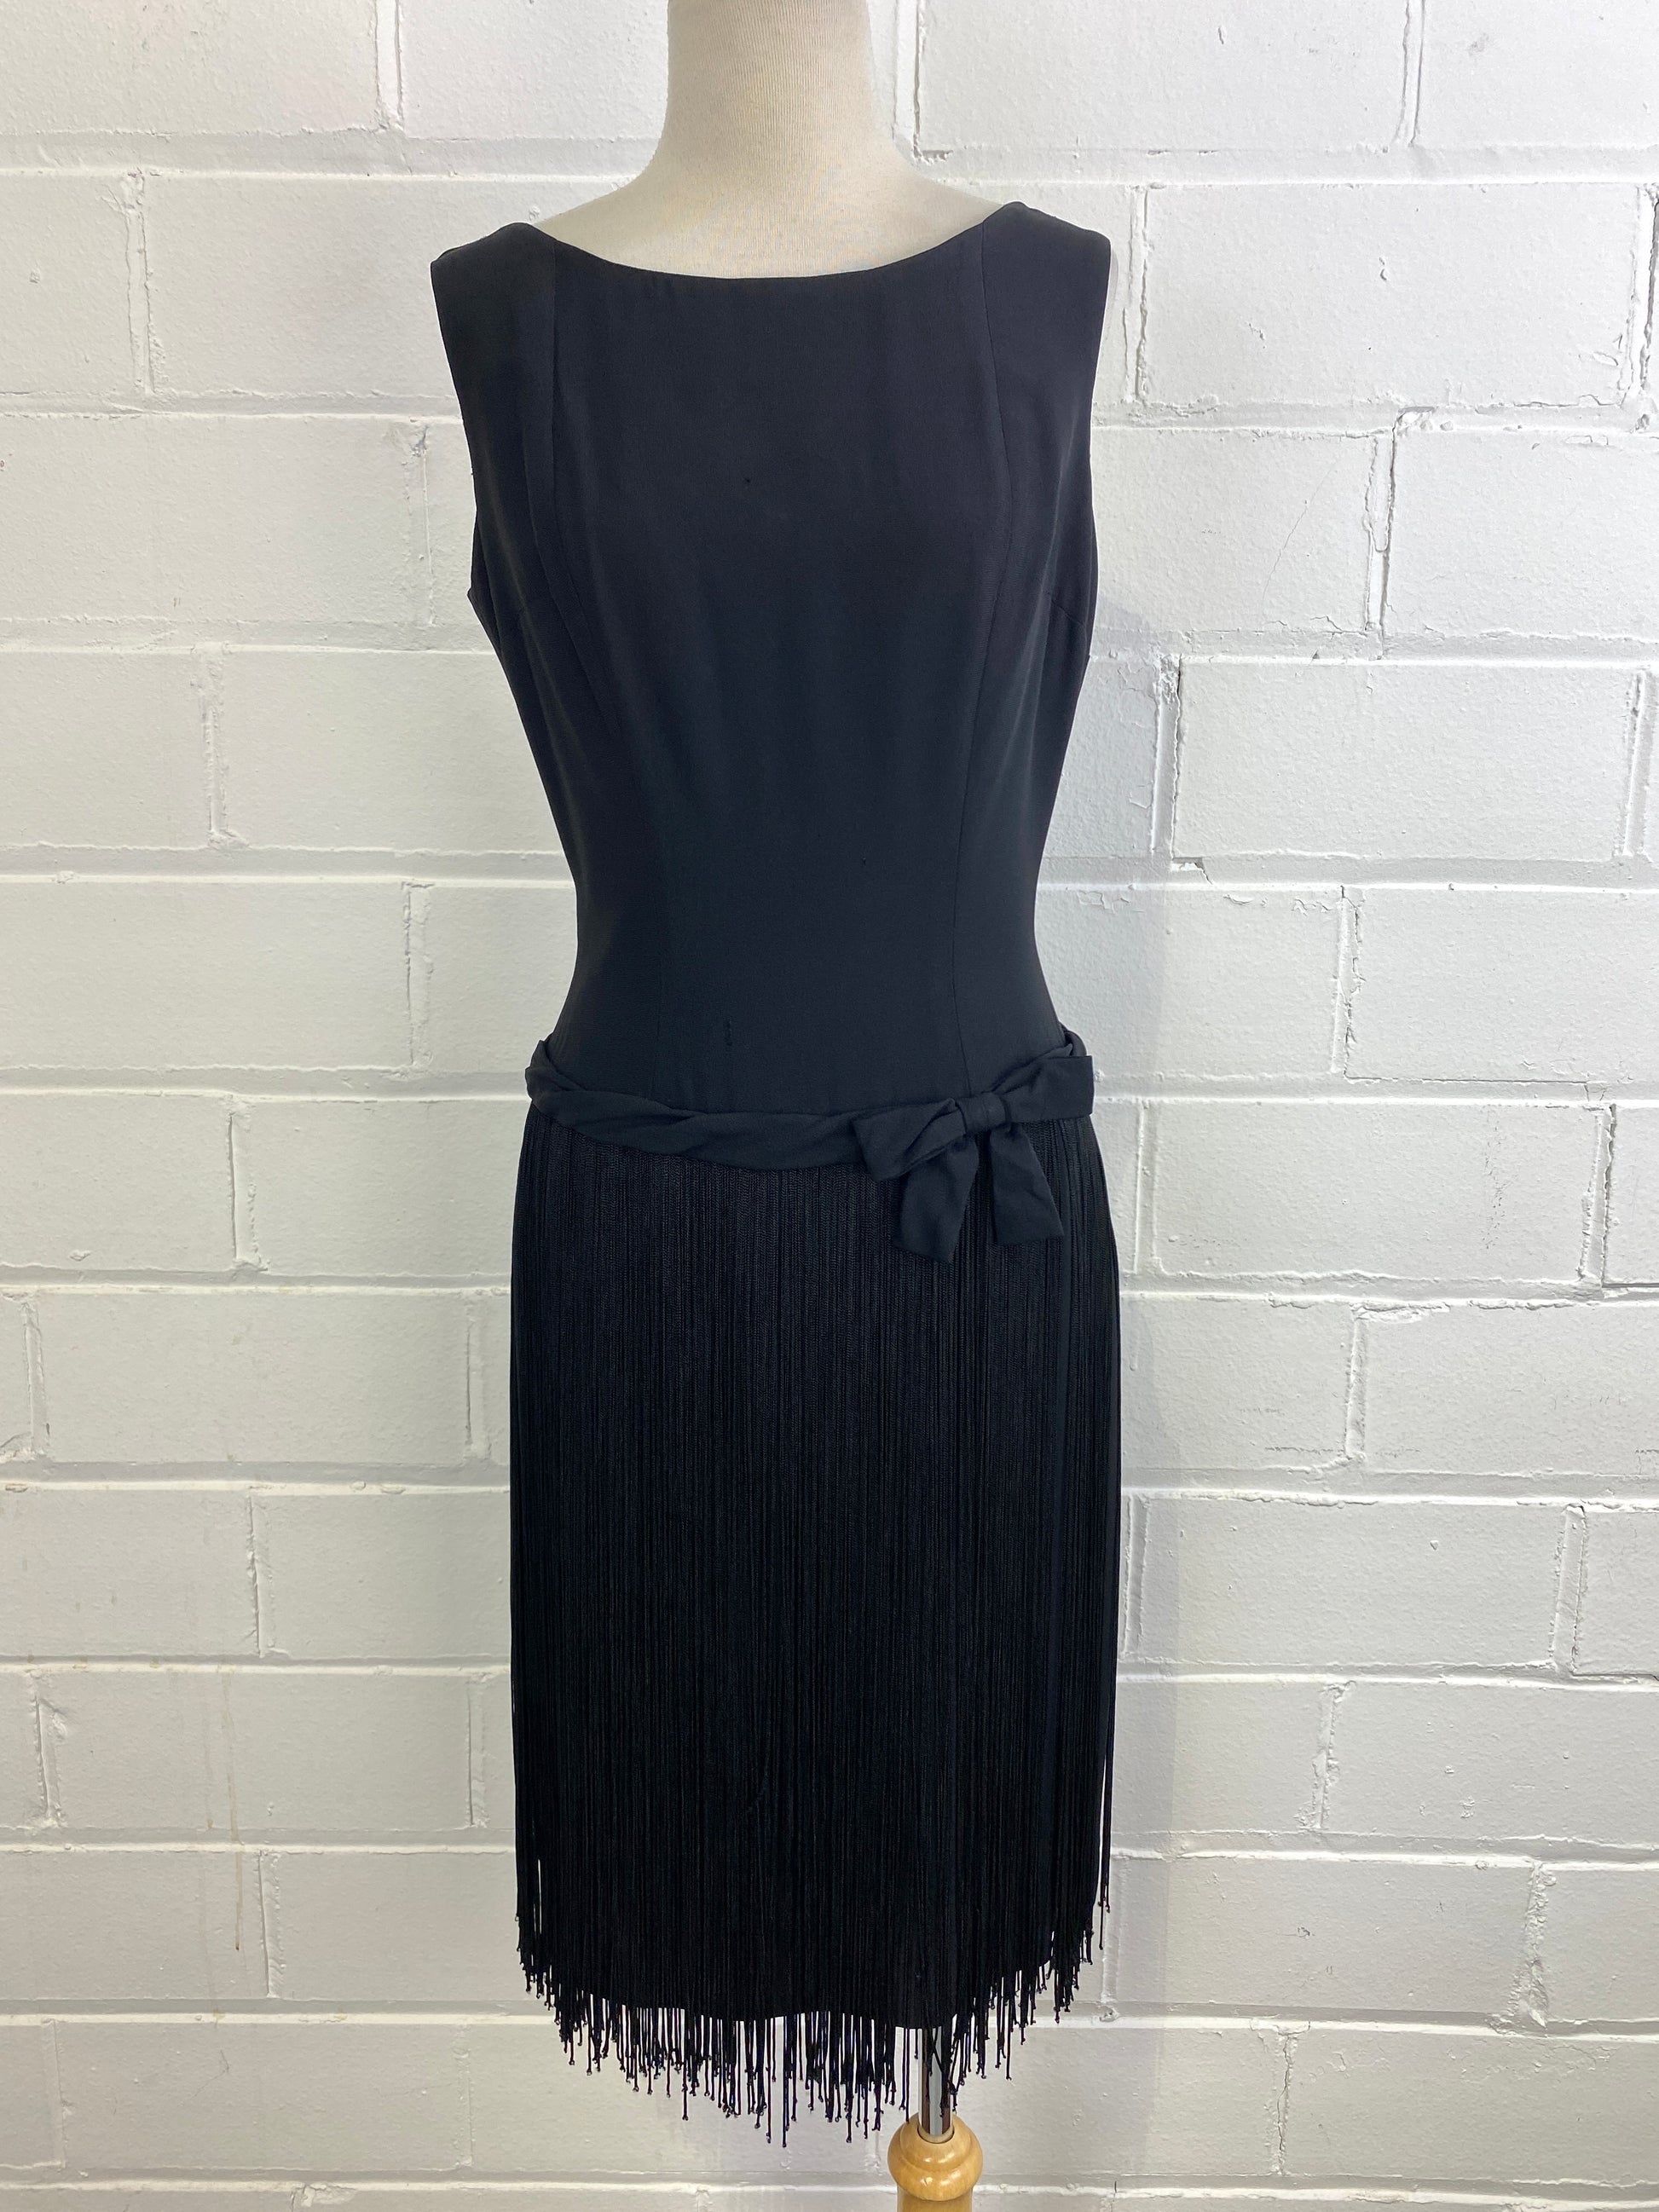 Vintage 1960s Does 20s Party Dress with Fringe Skirt & Waist Bow, Small